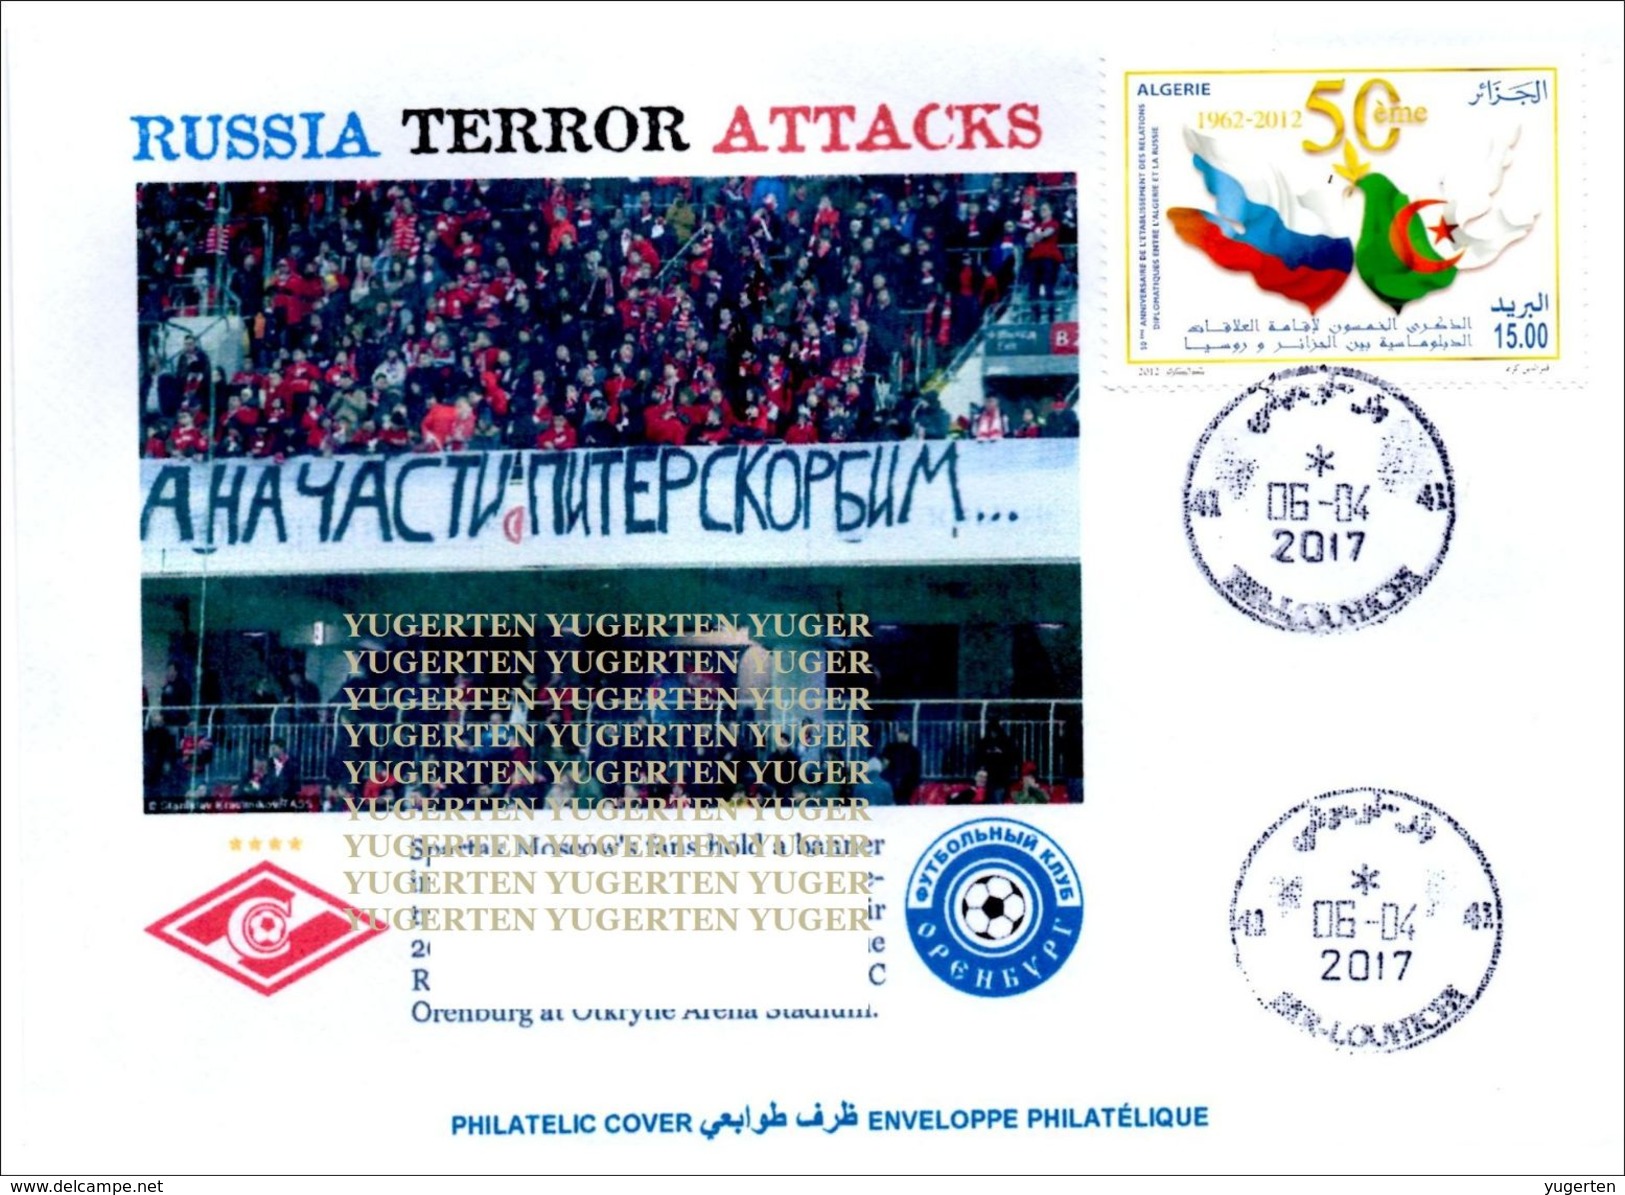 ALGHERIA 2017 Cover Russia Metro Terrorist Attacks - Cancelled Date Of Attacks Terrorism Spartak Moscow Football - Enveloppes